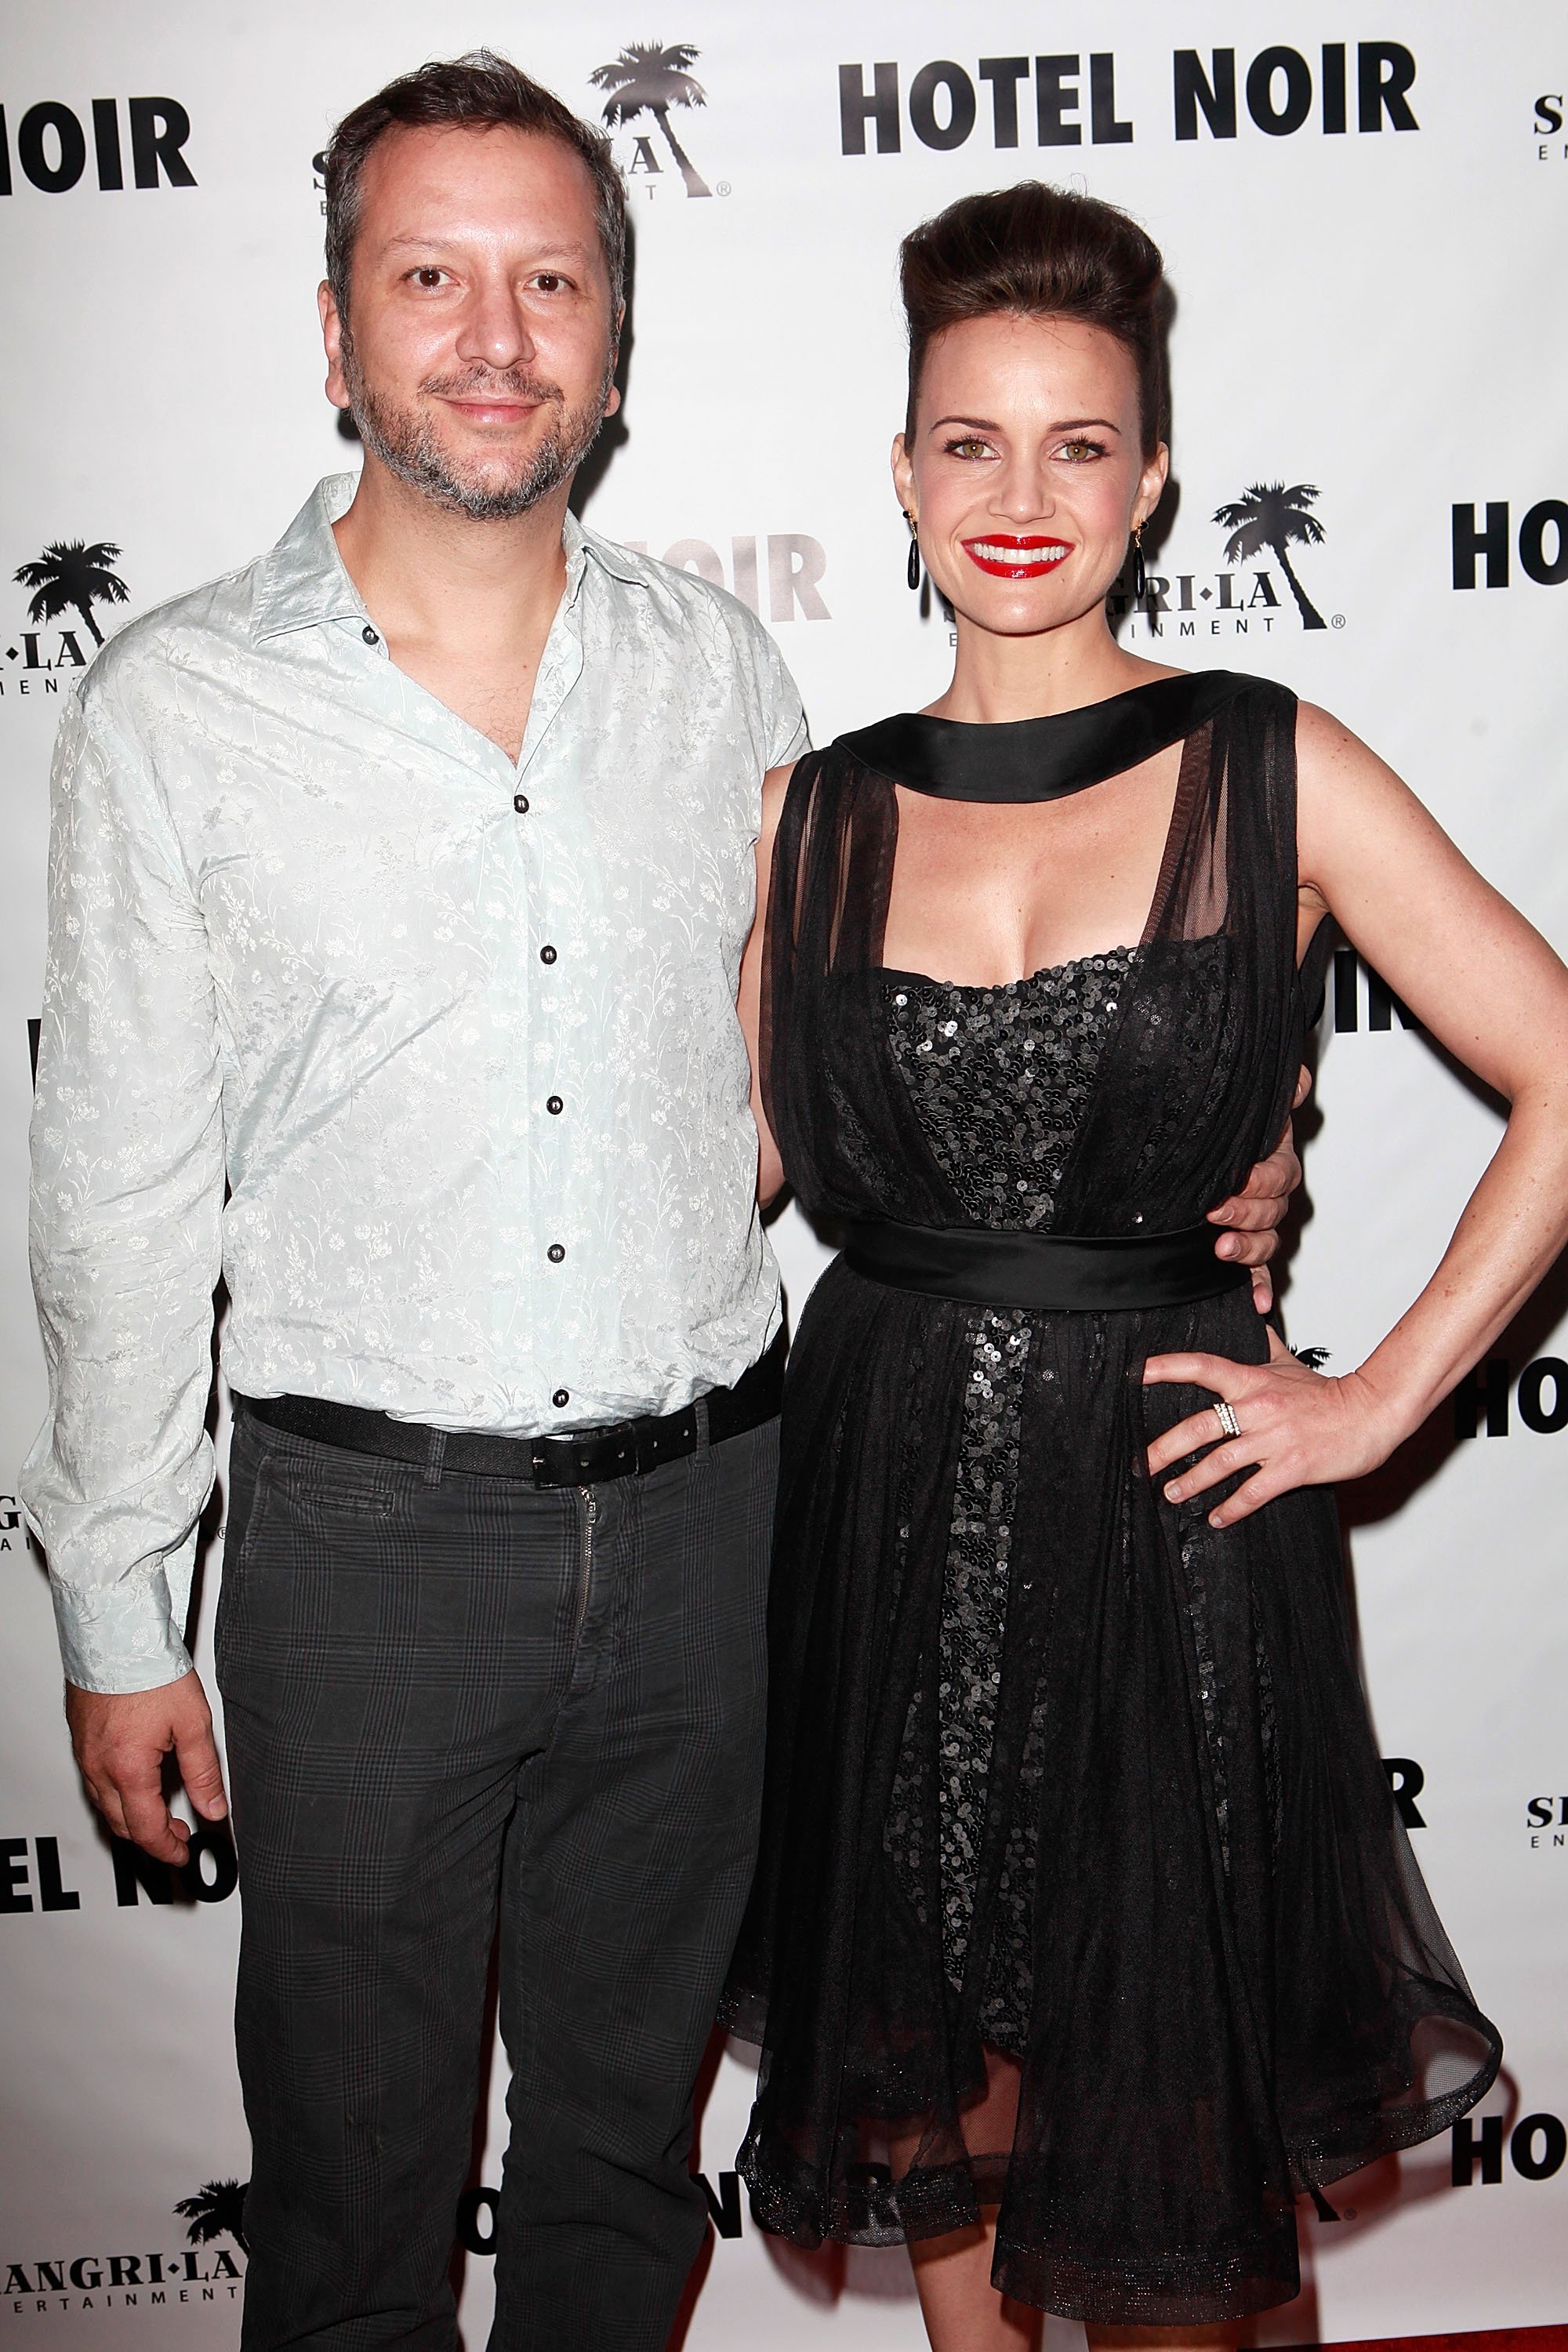 Sebastian Gutierrez and Carla Gugino attend the screening of "Hotel Noir" at Soho House on September 27, 2012, in West Hollywood, California. | Source: Getty Images